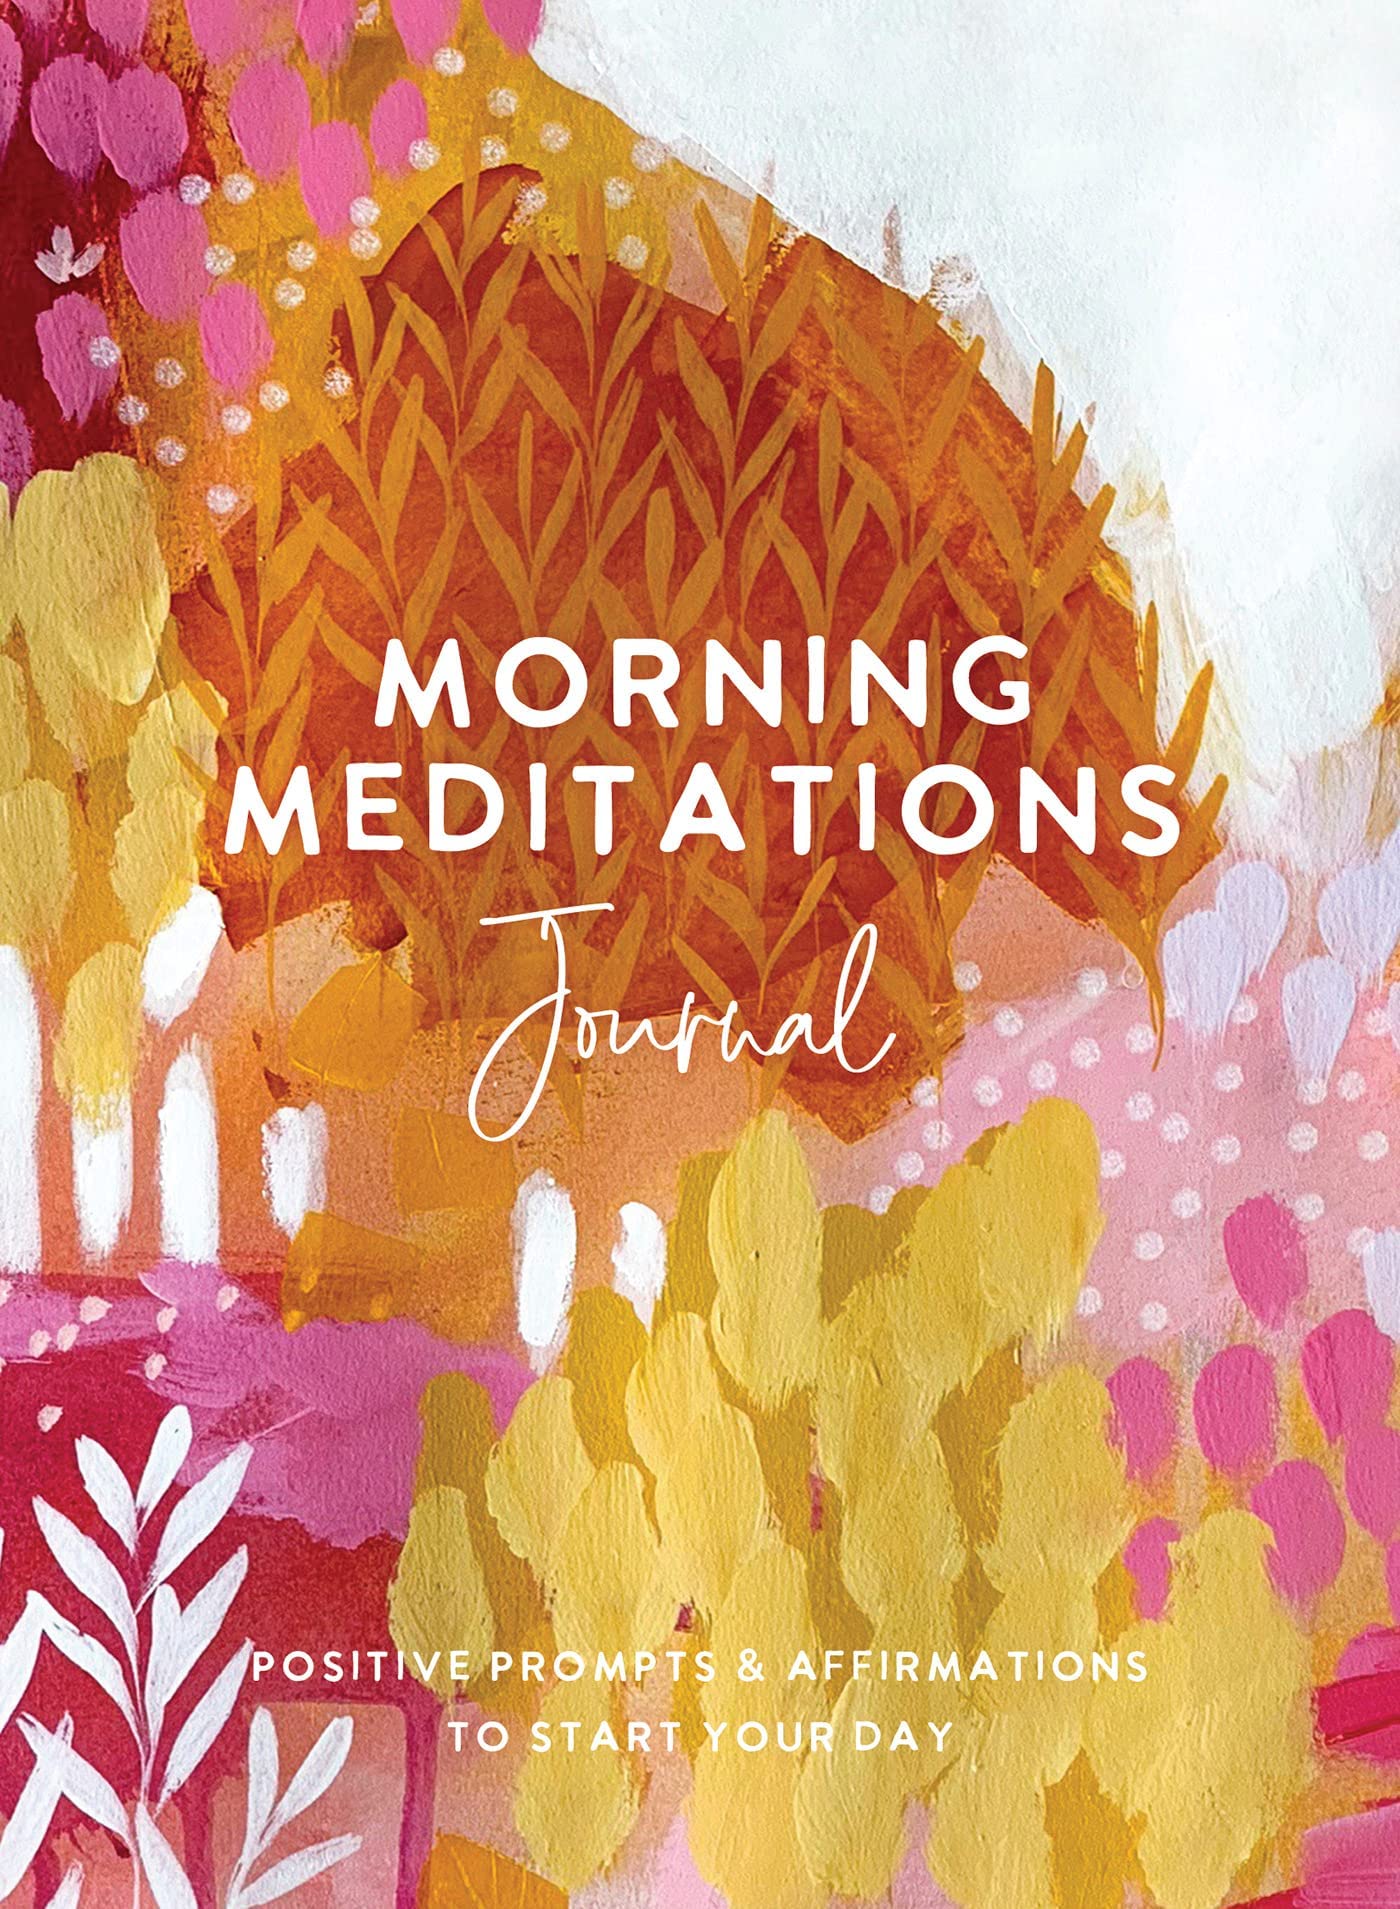 Morning Meditations Journal: Positive Prompts & Affirmations To Start Your Day